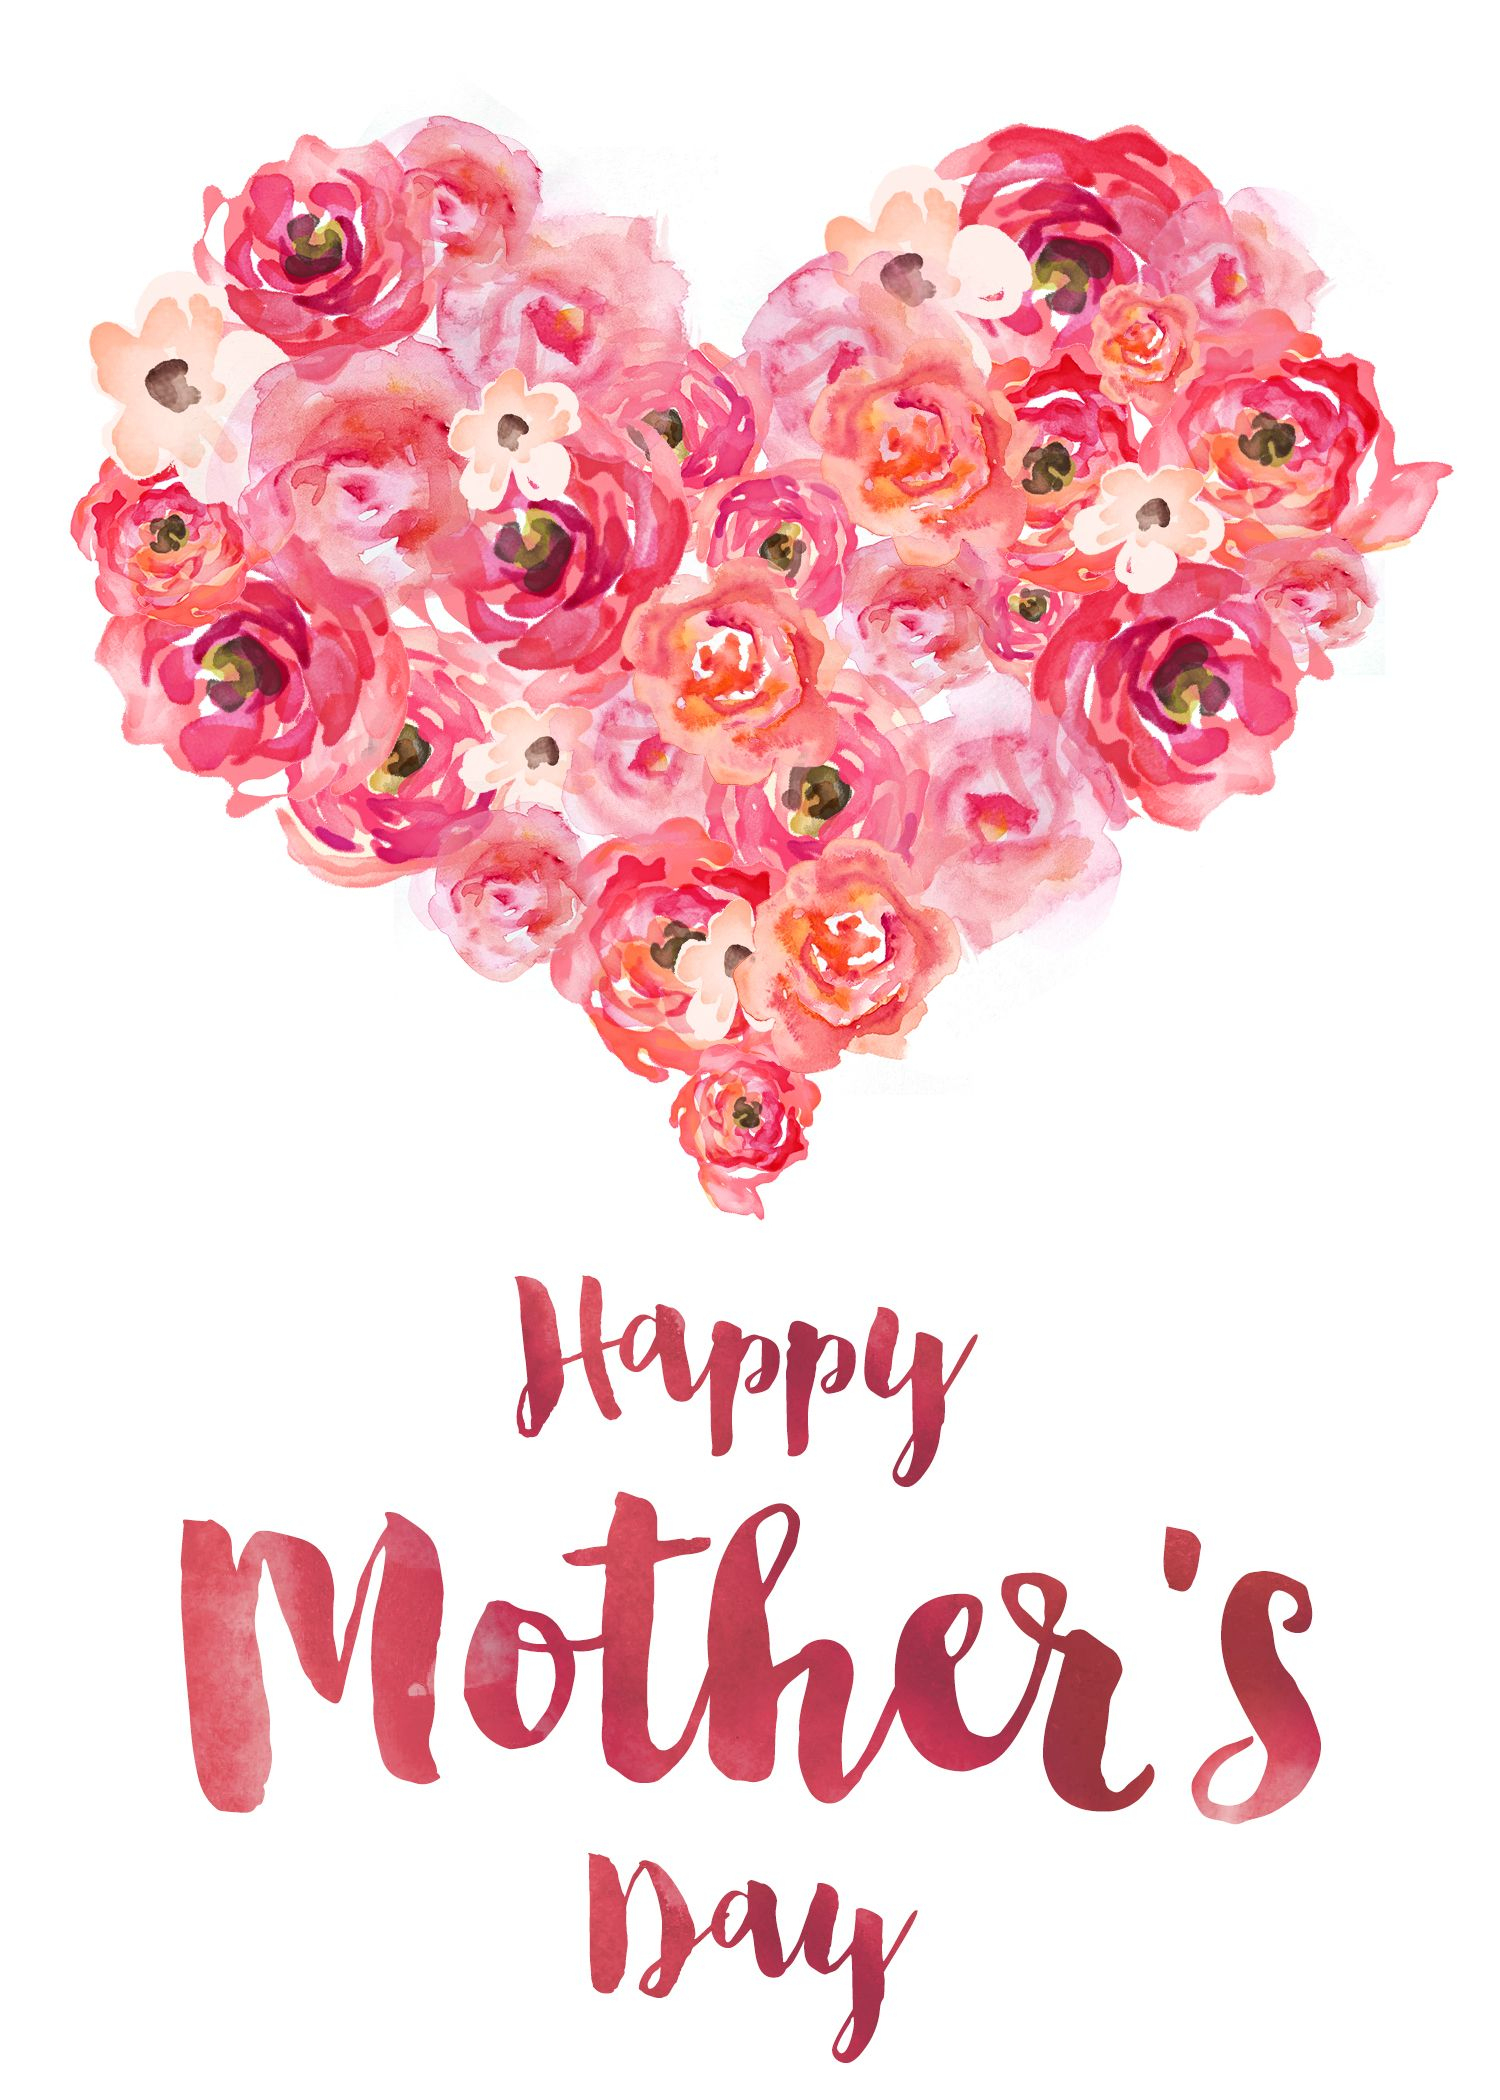 Customized Banner | Share Your Heart | Mothers Day Images, Happy - Free Spanish Mothers Day Cards Printable